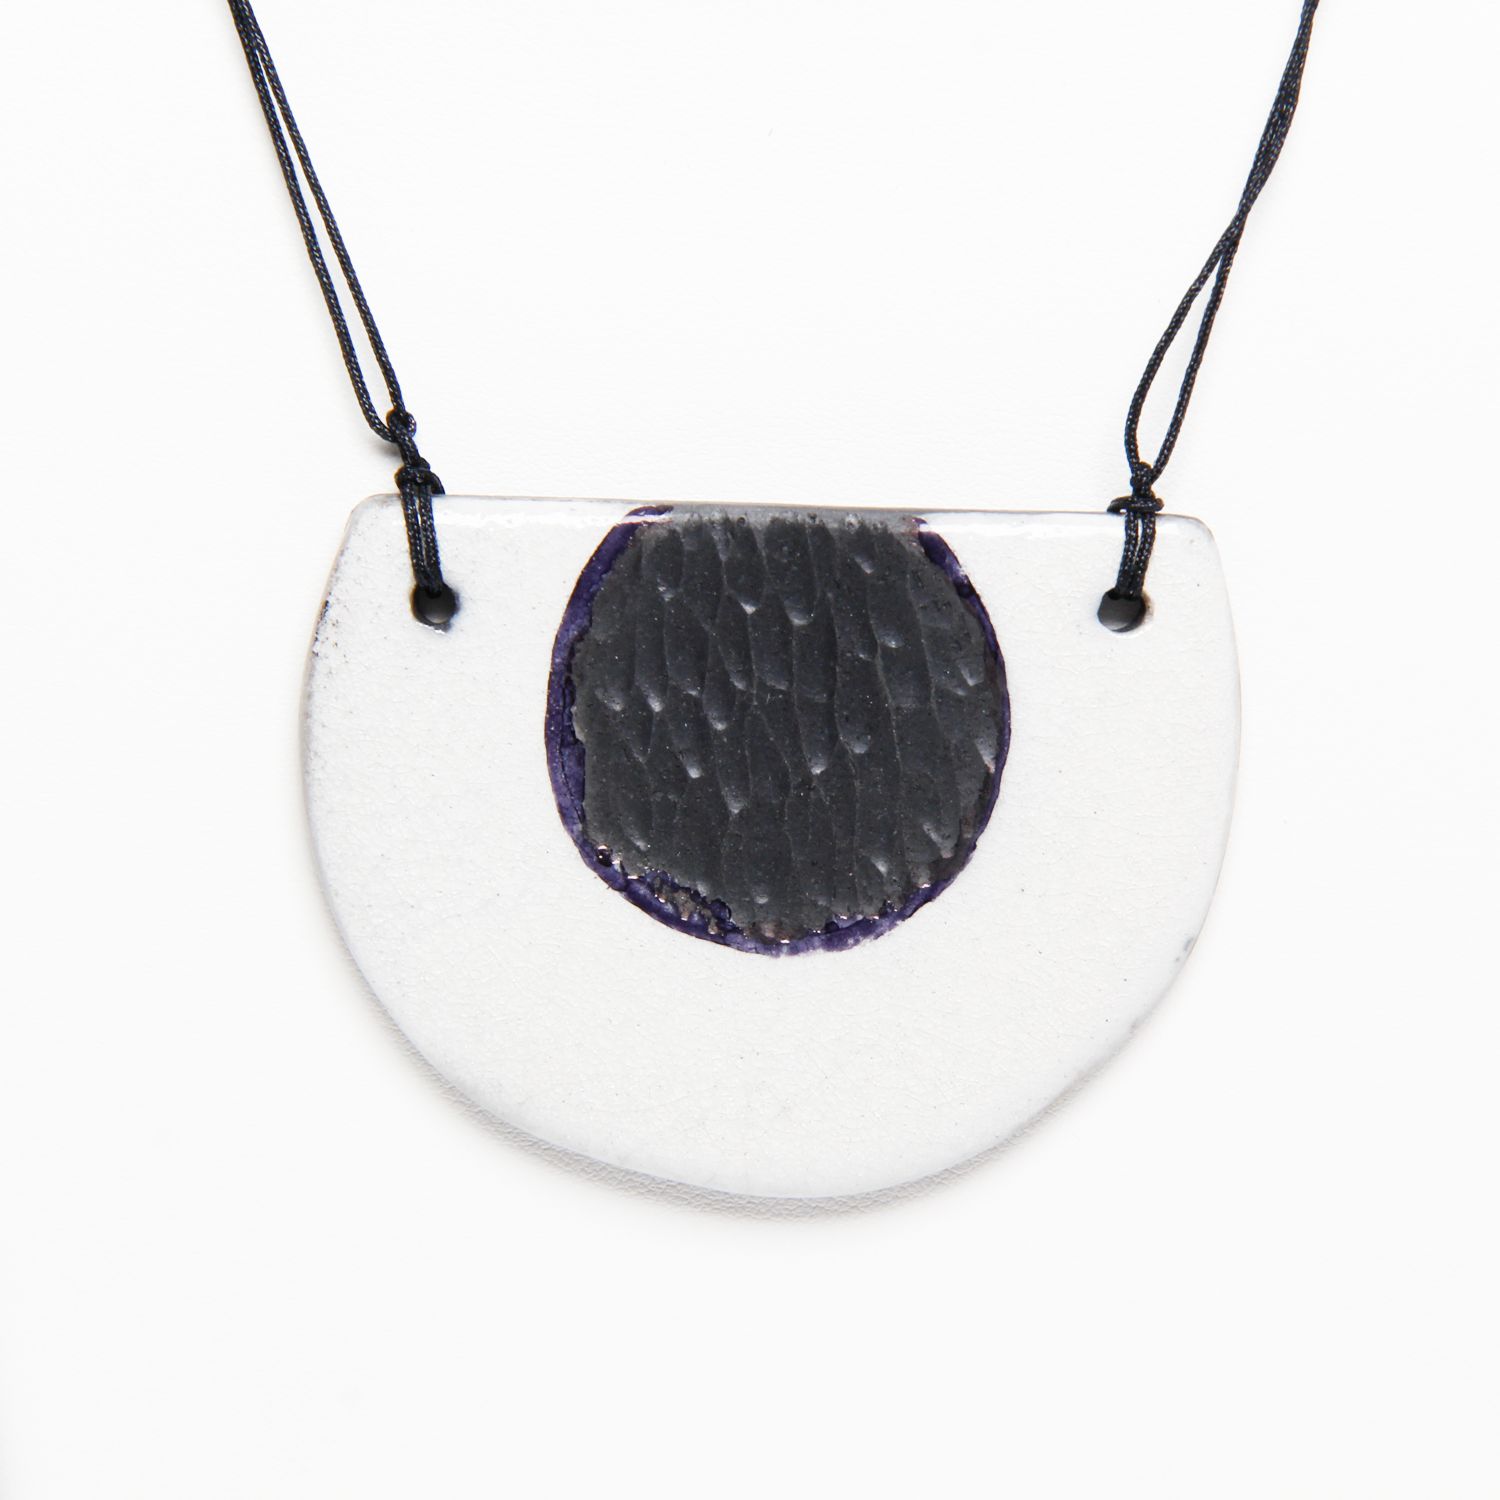 Jacquie Blondin: Half-Moon with Semi-Circle in White Crackle and Carbon Black Product Image 2 of 2